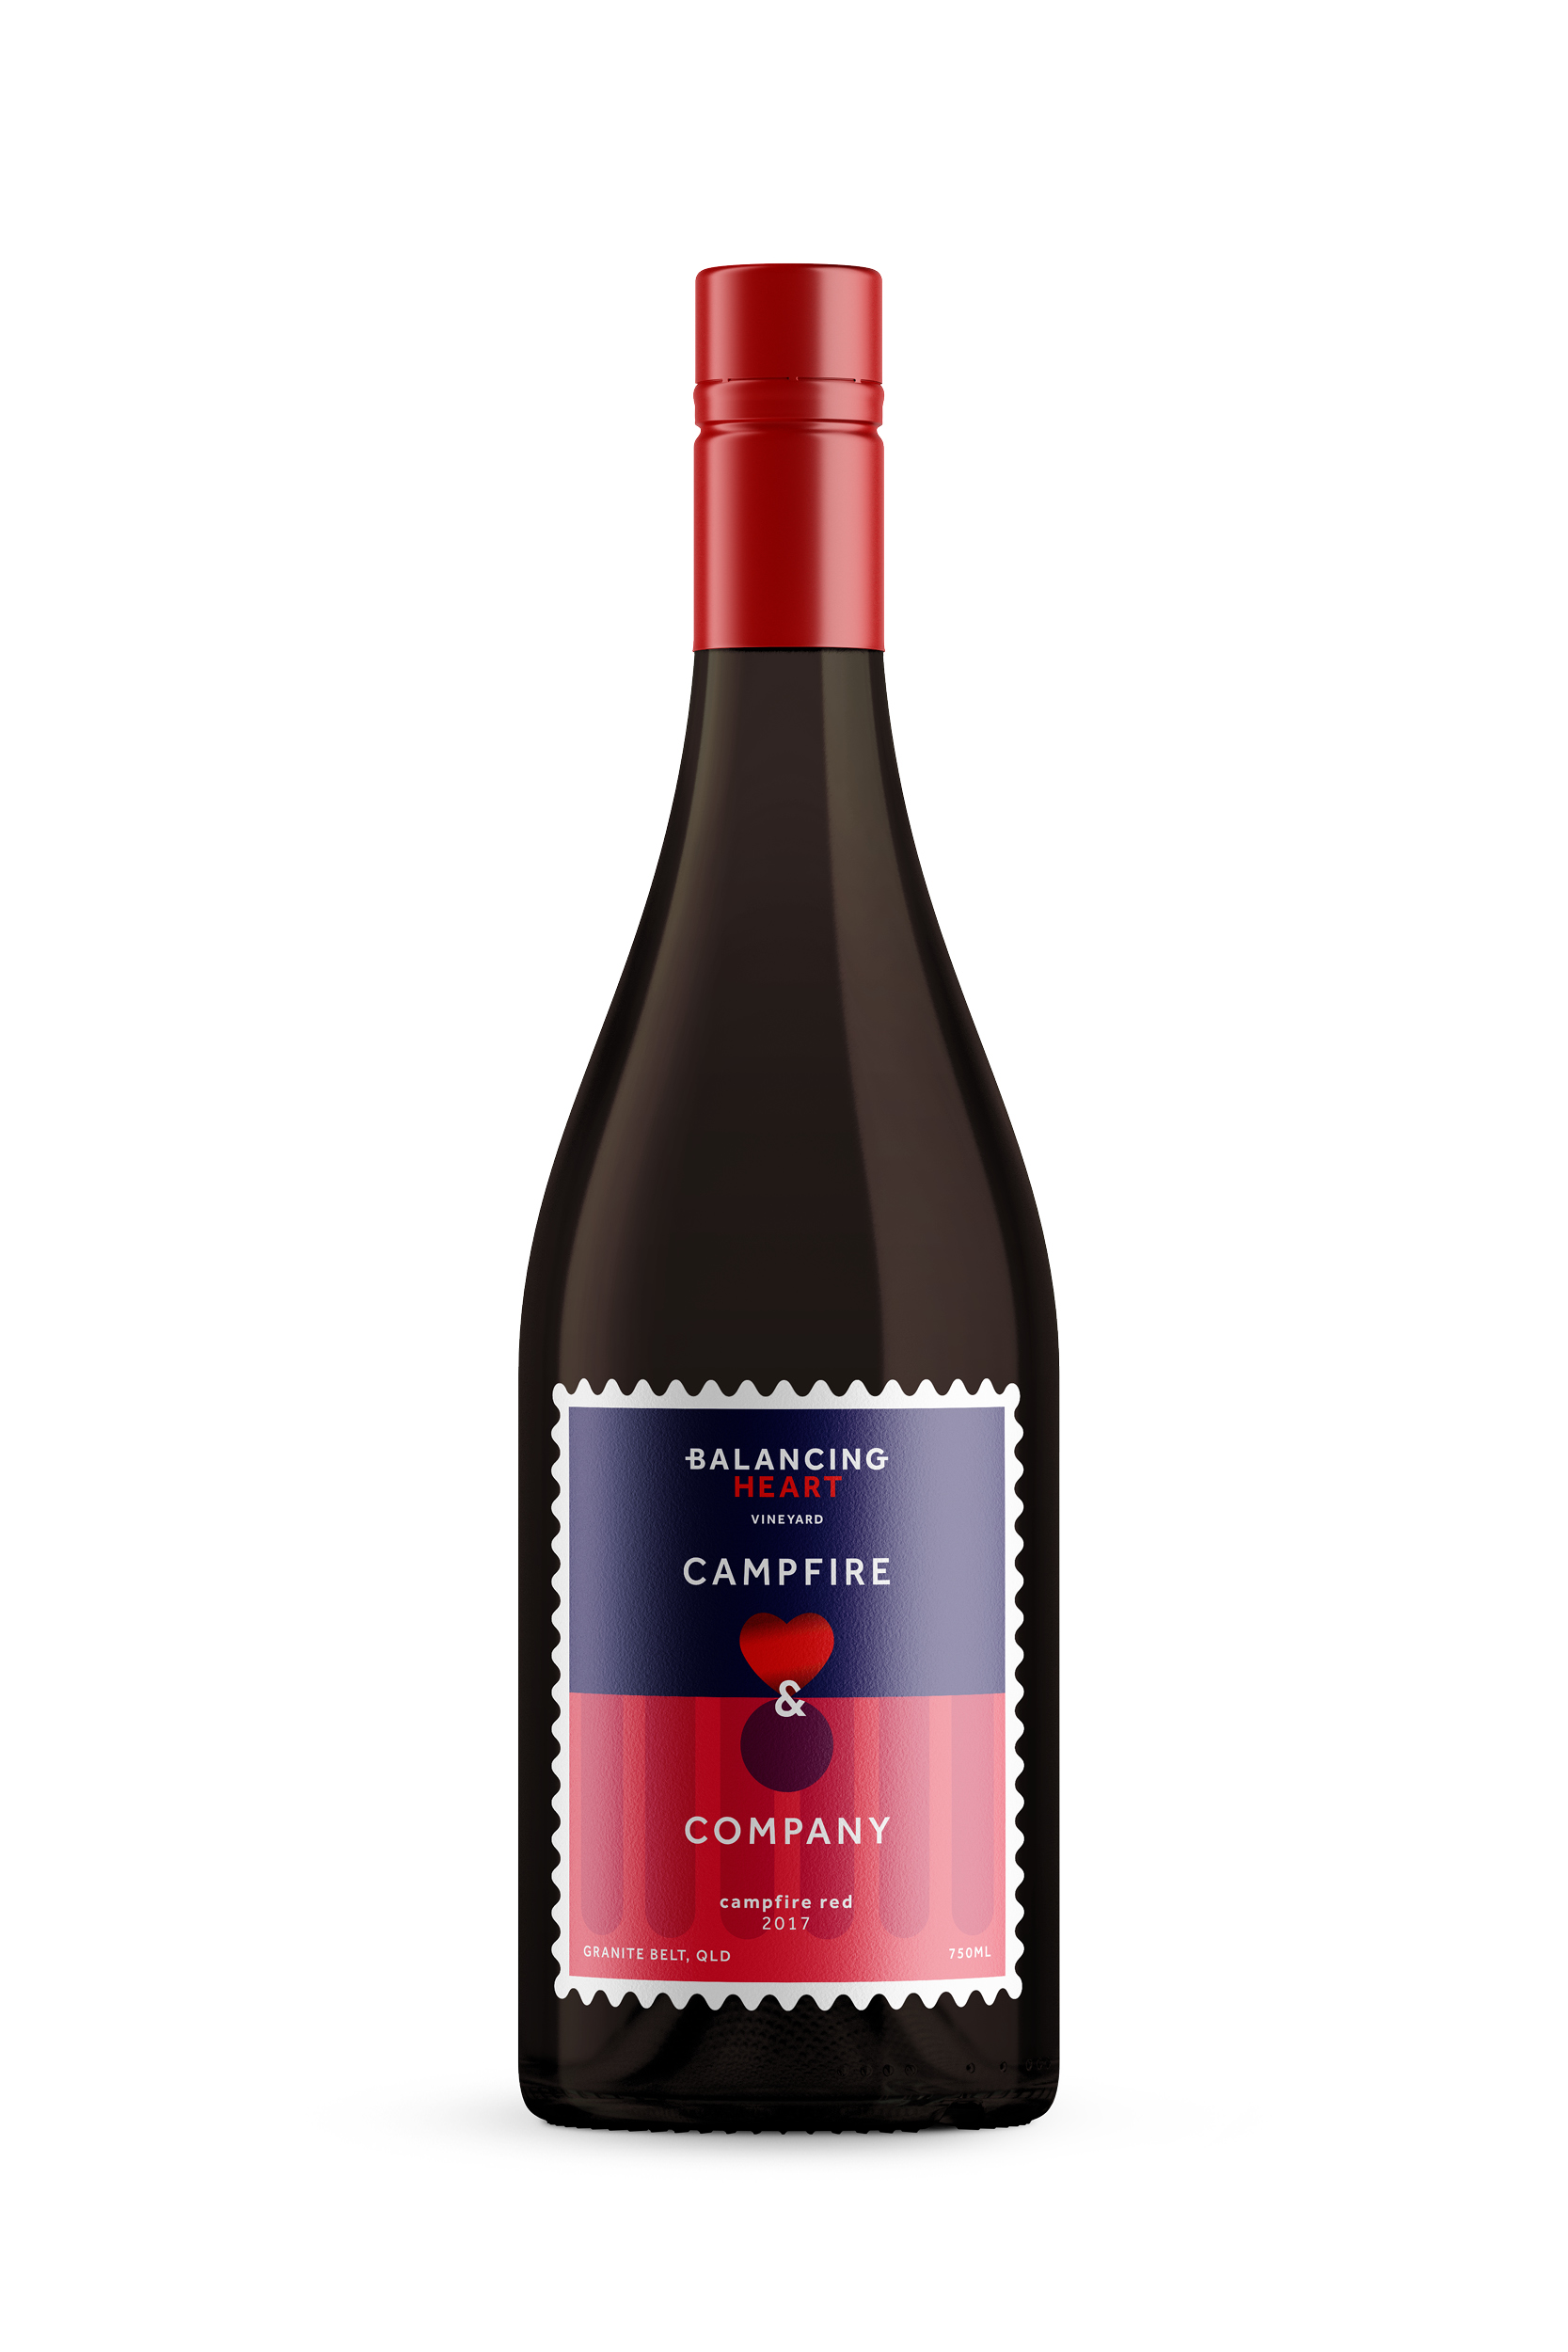 Campfire & company wine label for Balancing Heart Vineyard, collateral branding design